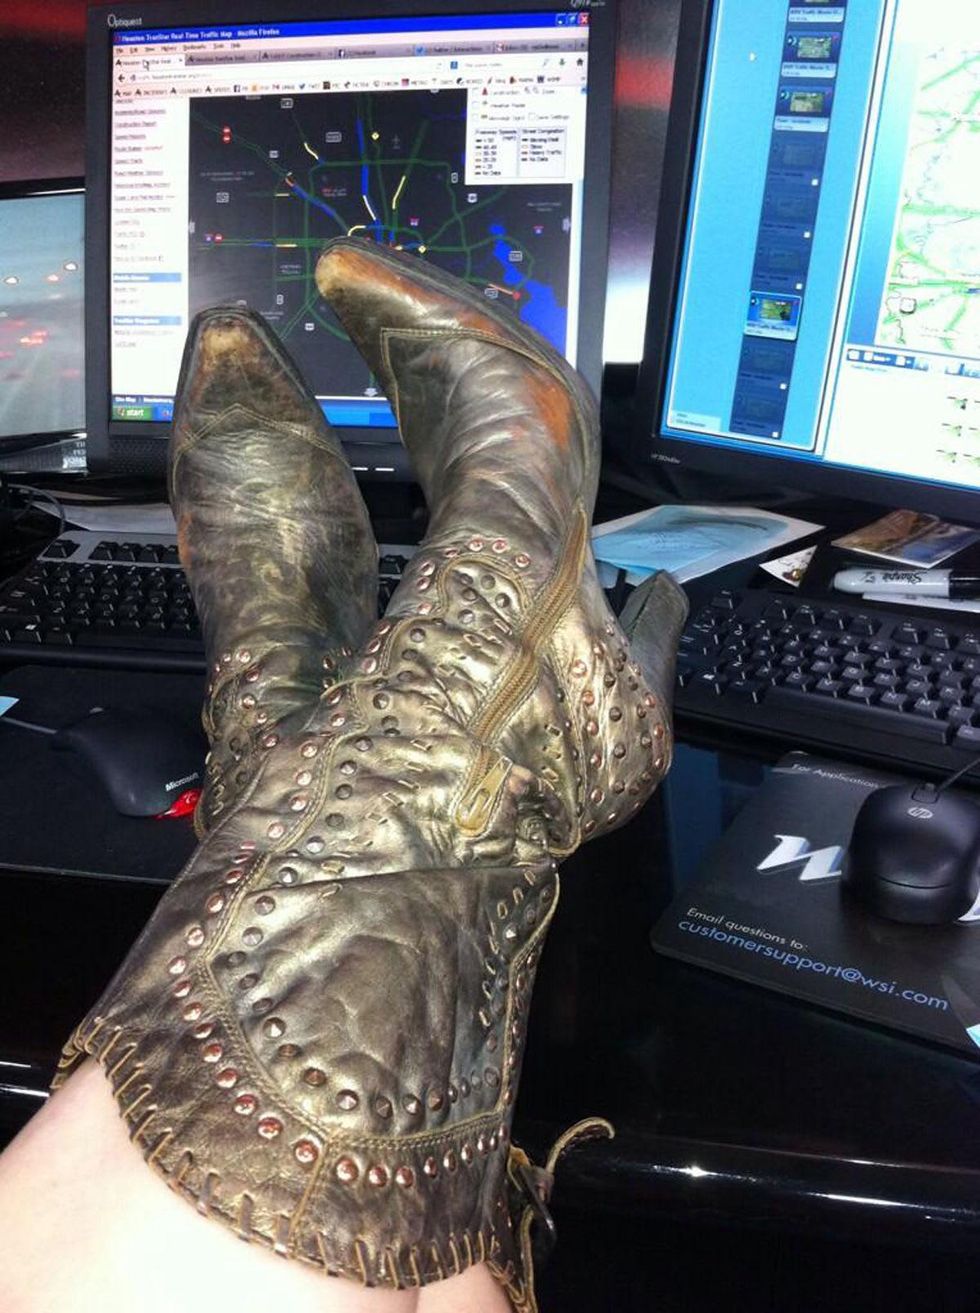 Go Texan Day February 2014 gold cowboy boots in desk